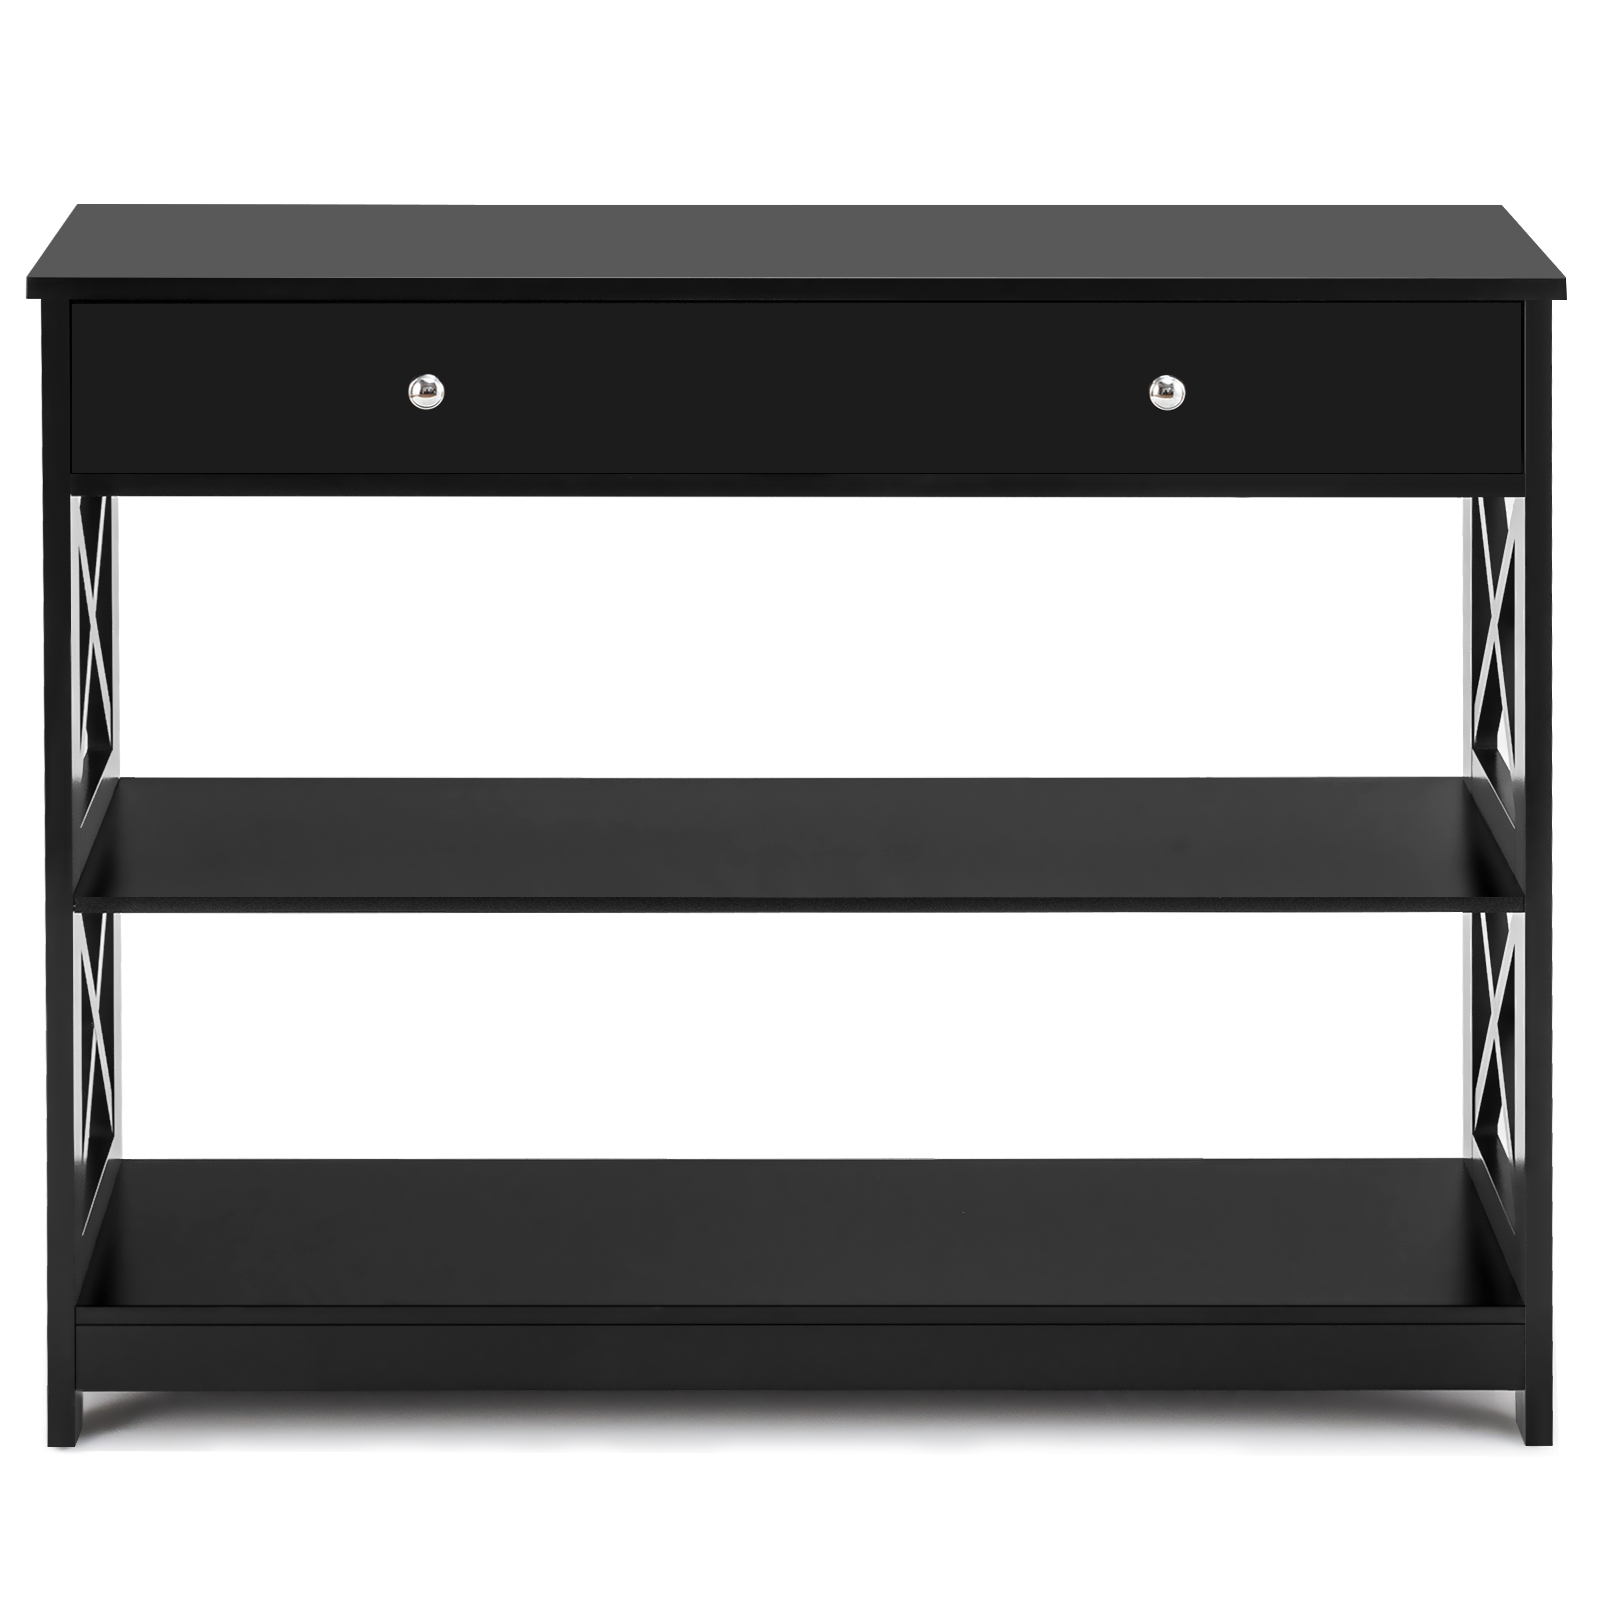 Topb004741 Top Console Table Narrow, Narrow Entryway Table With Shelves